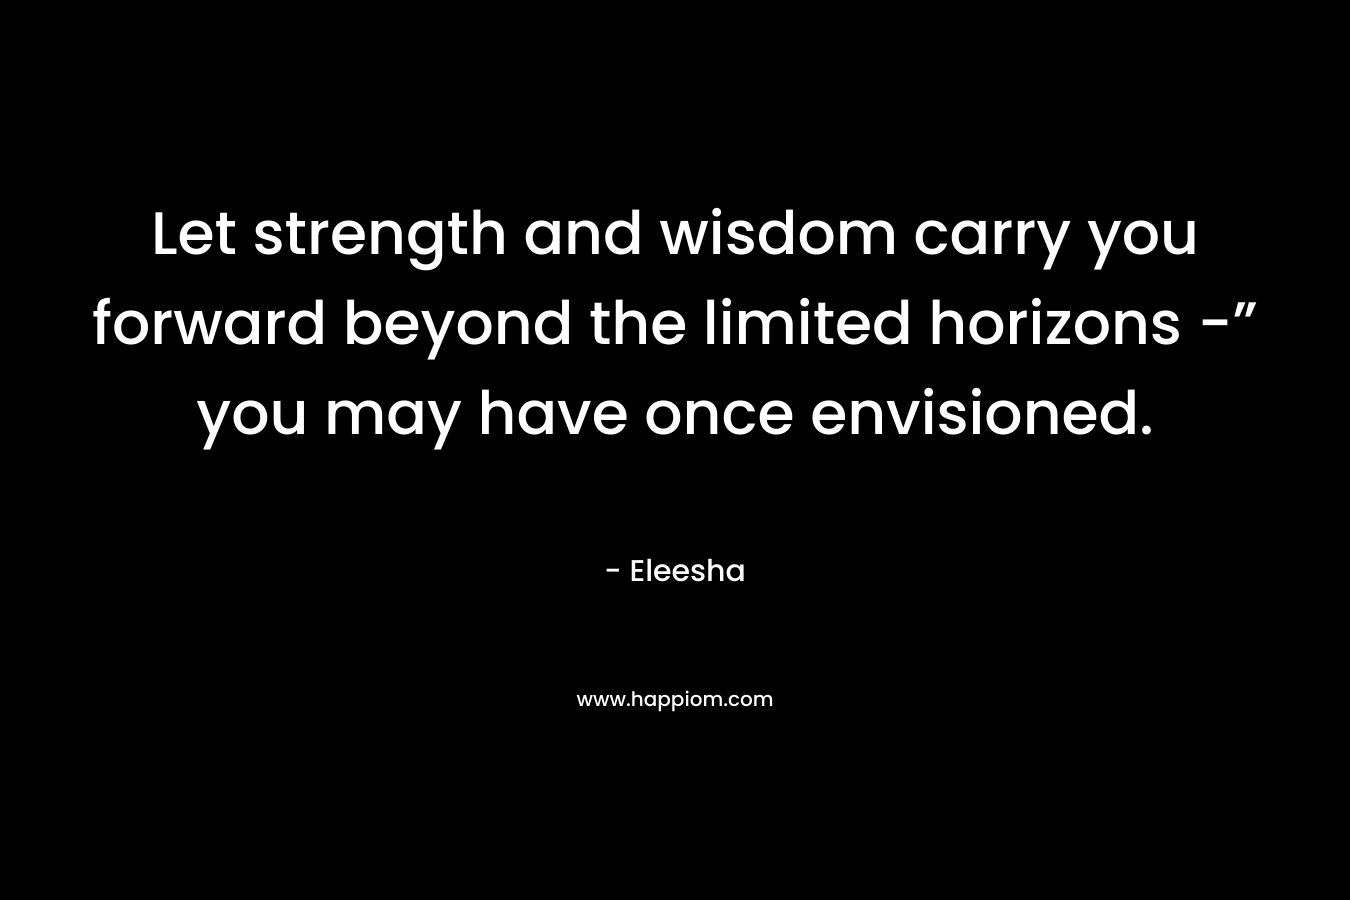 Let strength and wisdom carry you forward beyond the limited horizons -” you may have once envisioned. – Eleesha